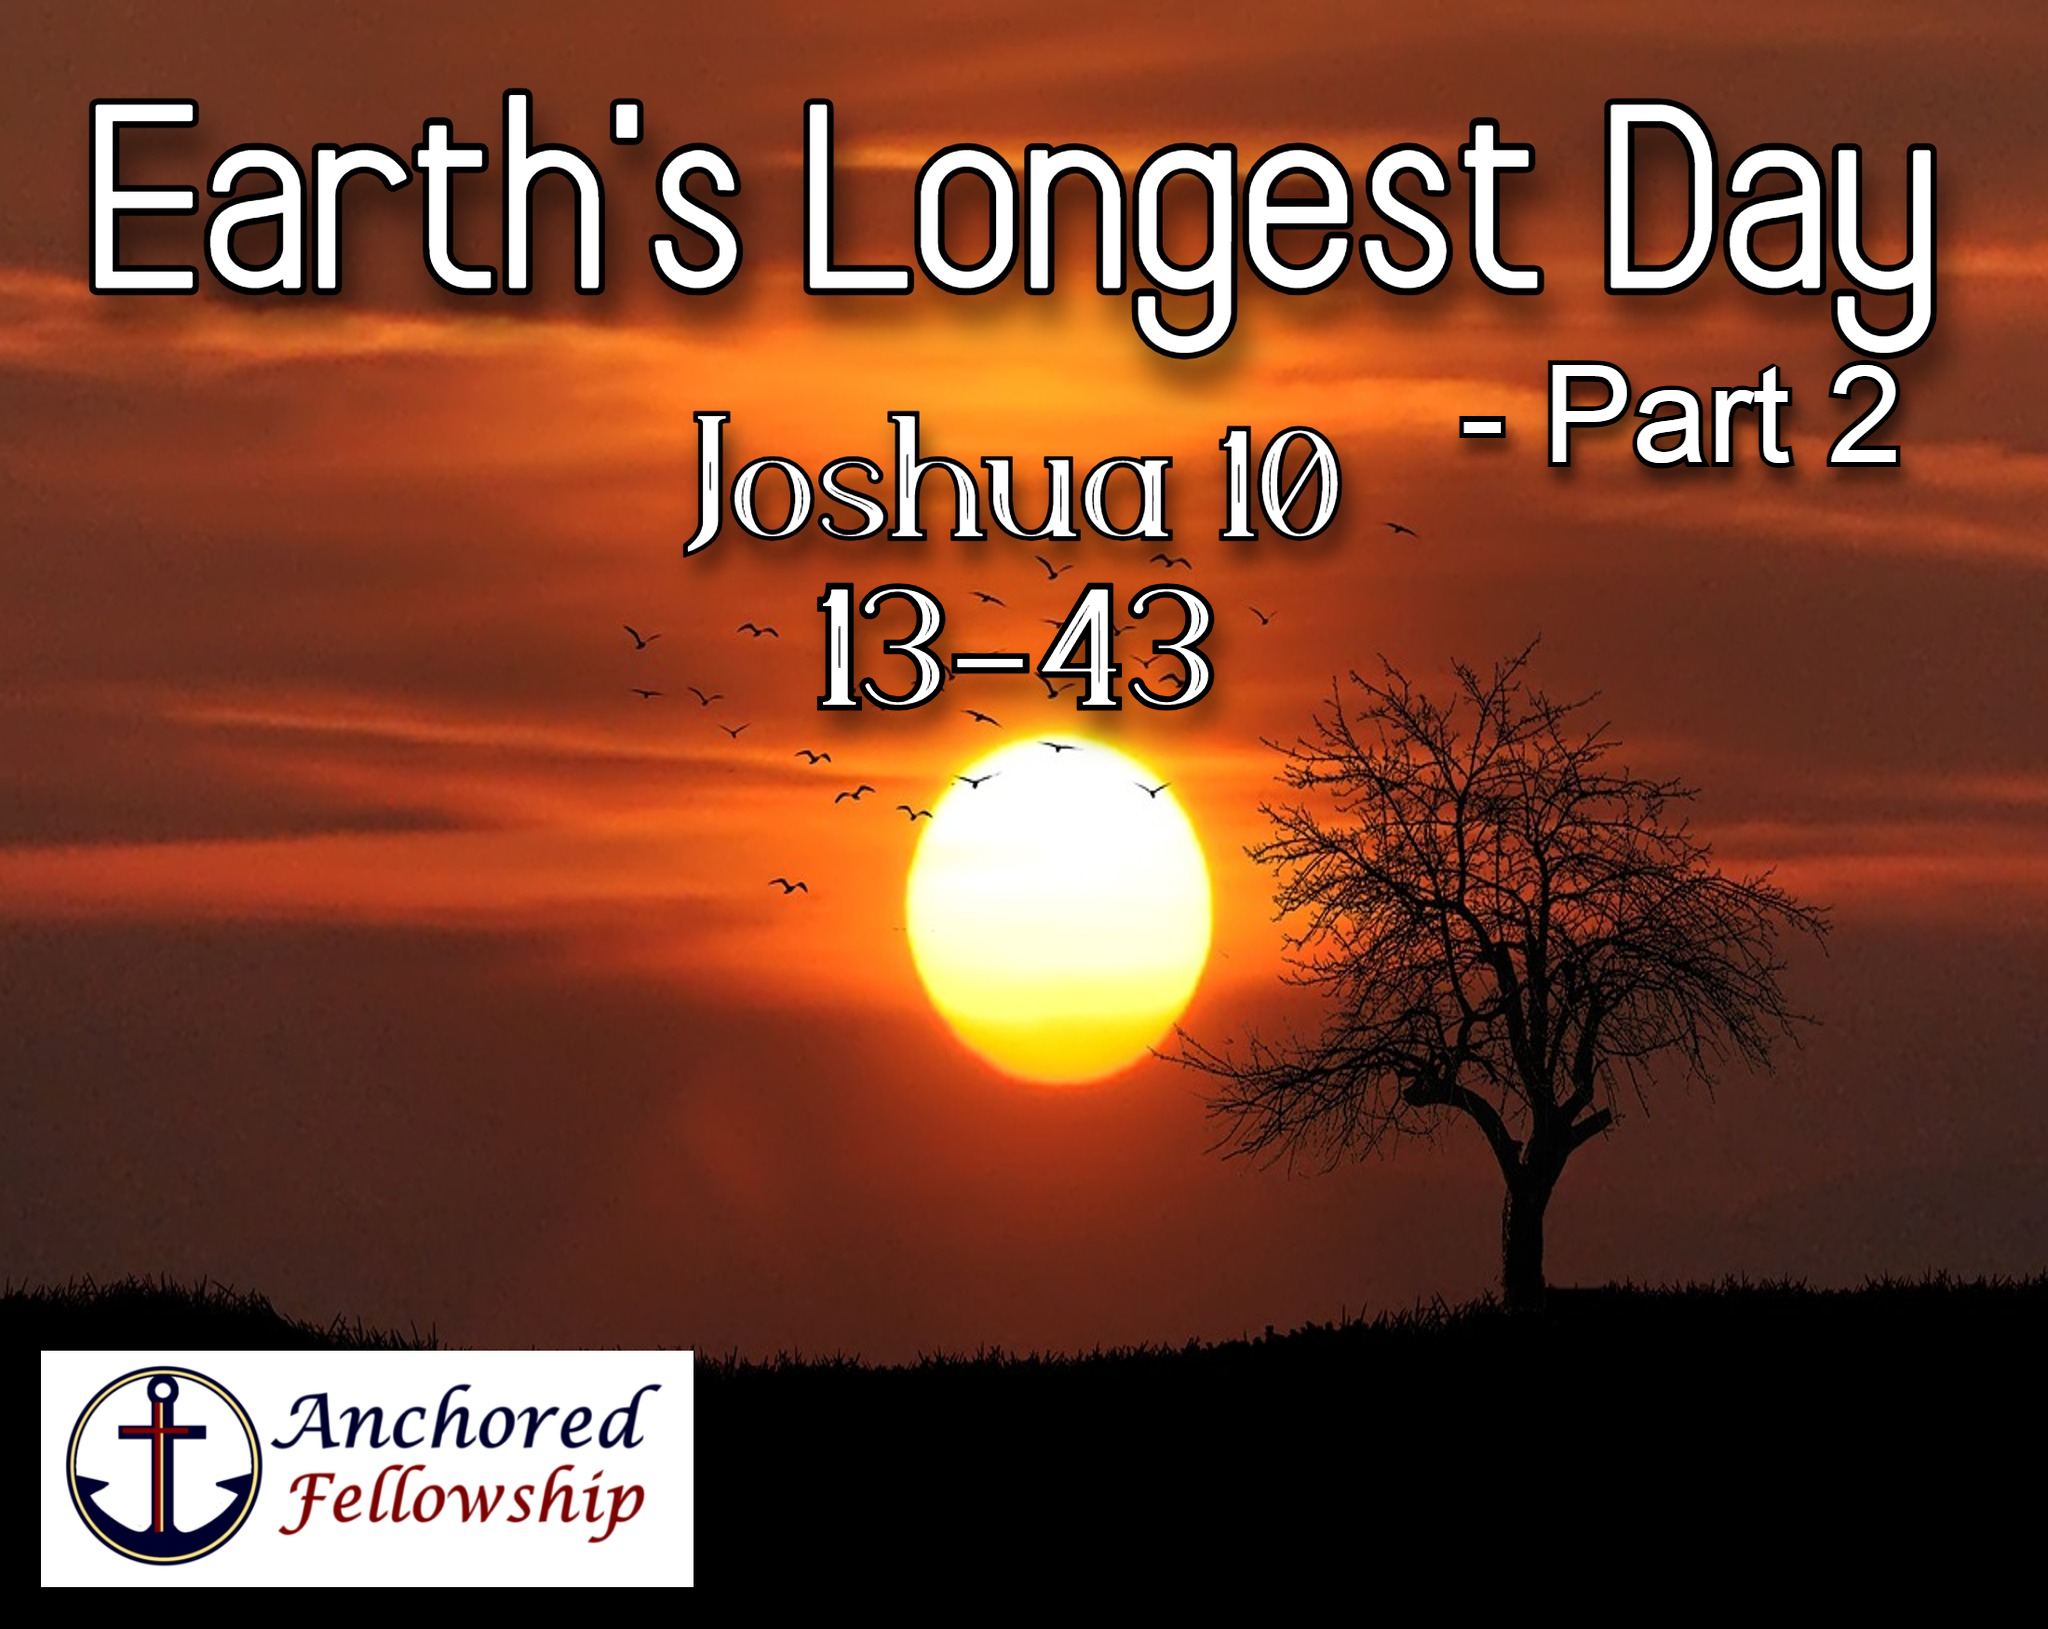 Earth's Longest Day - Part 2 Image